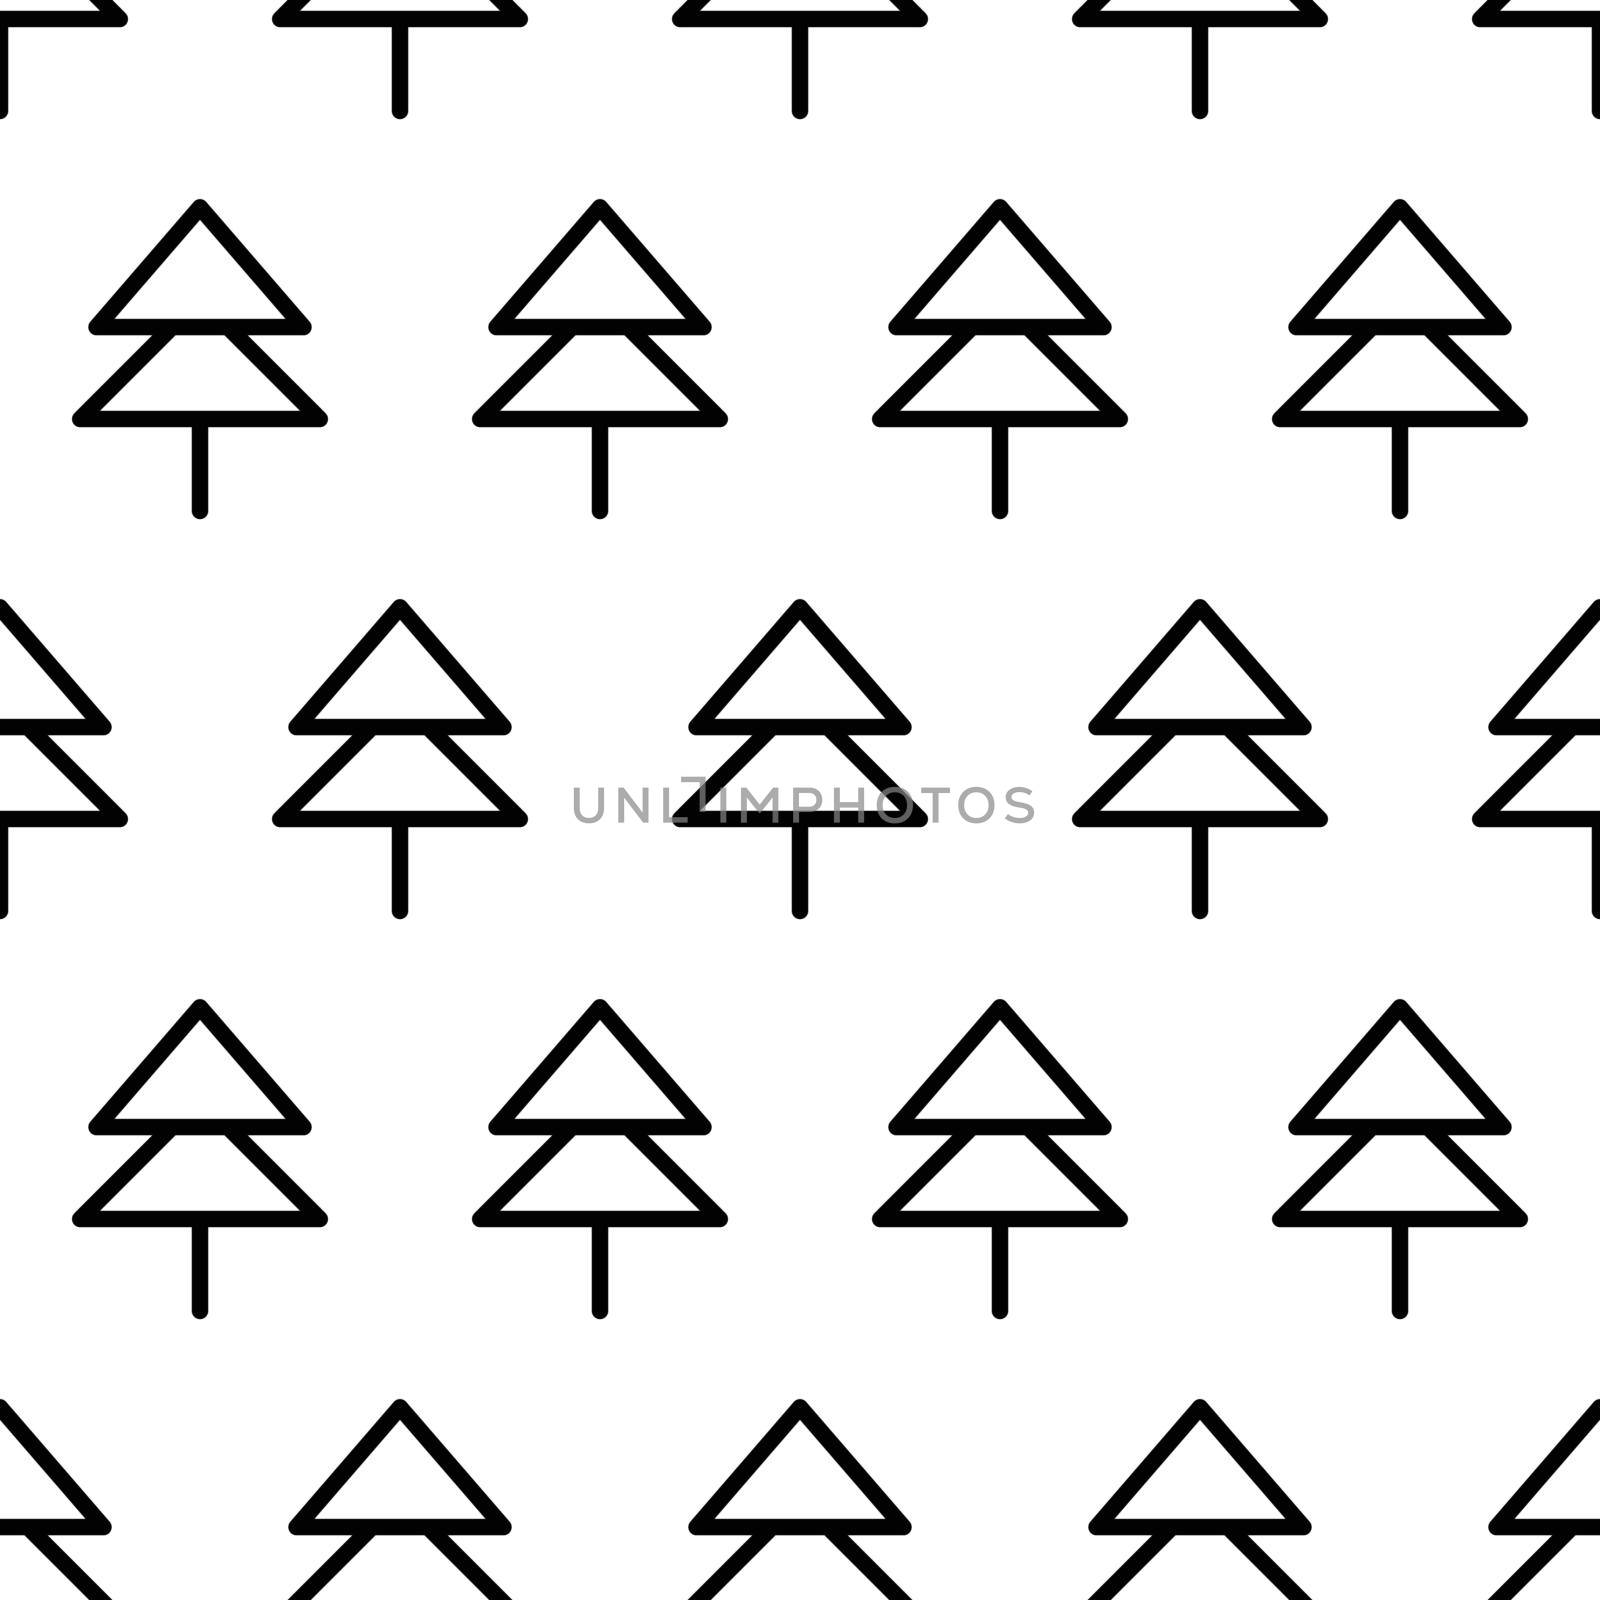 Black and white seamless pattern with fir tree icon. Vector trees symbol sign. Plants, landscape design for print, card, postcard, fabric, textile. Business idea concept by allaku